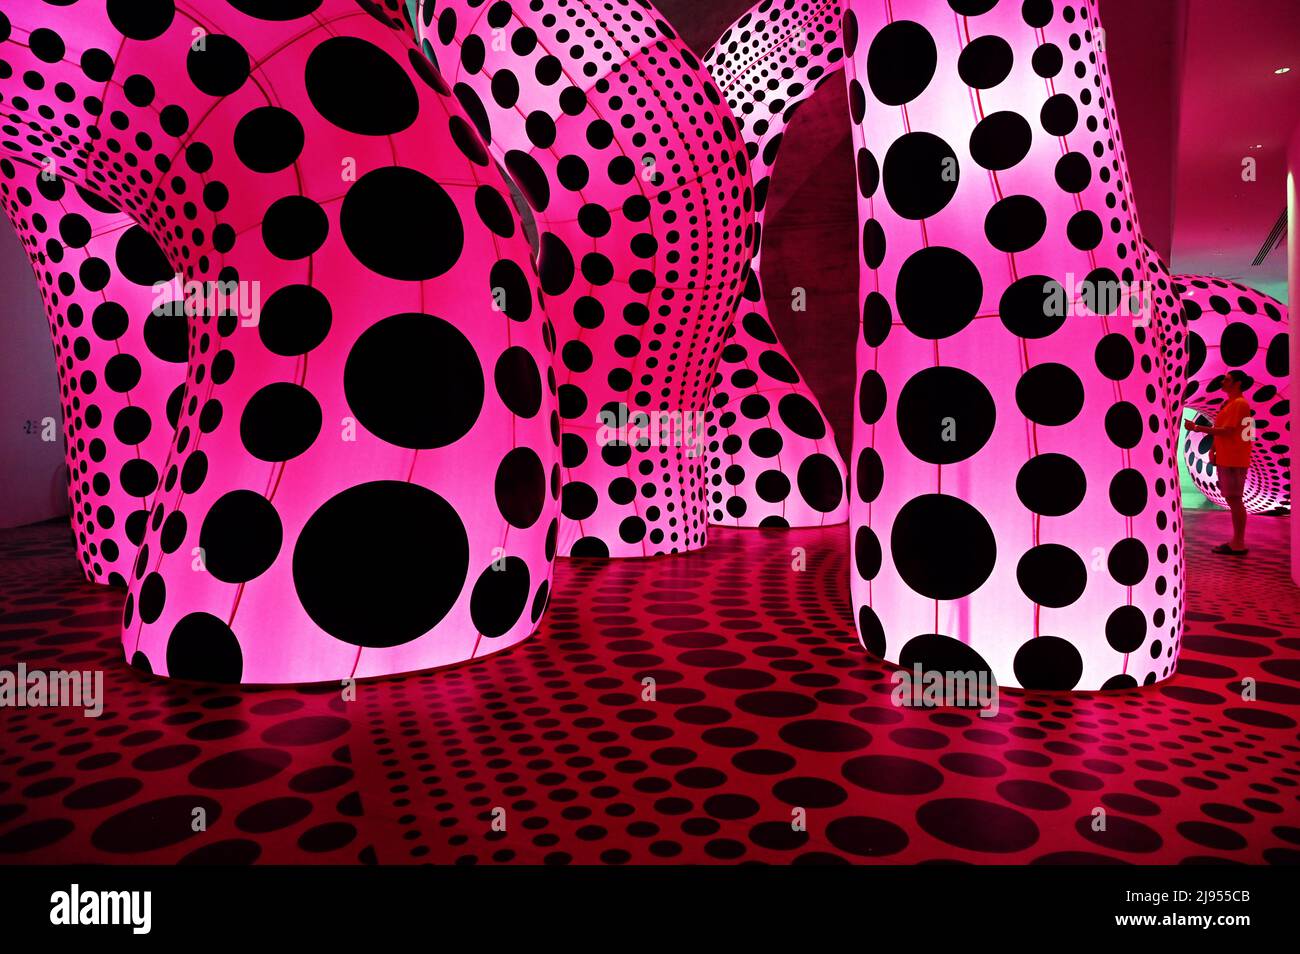 Have you seen the giant Yayoi Kusama installation outside of @harrods , London